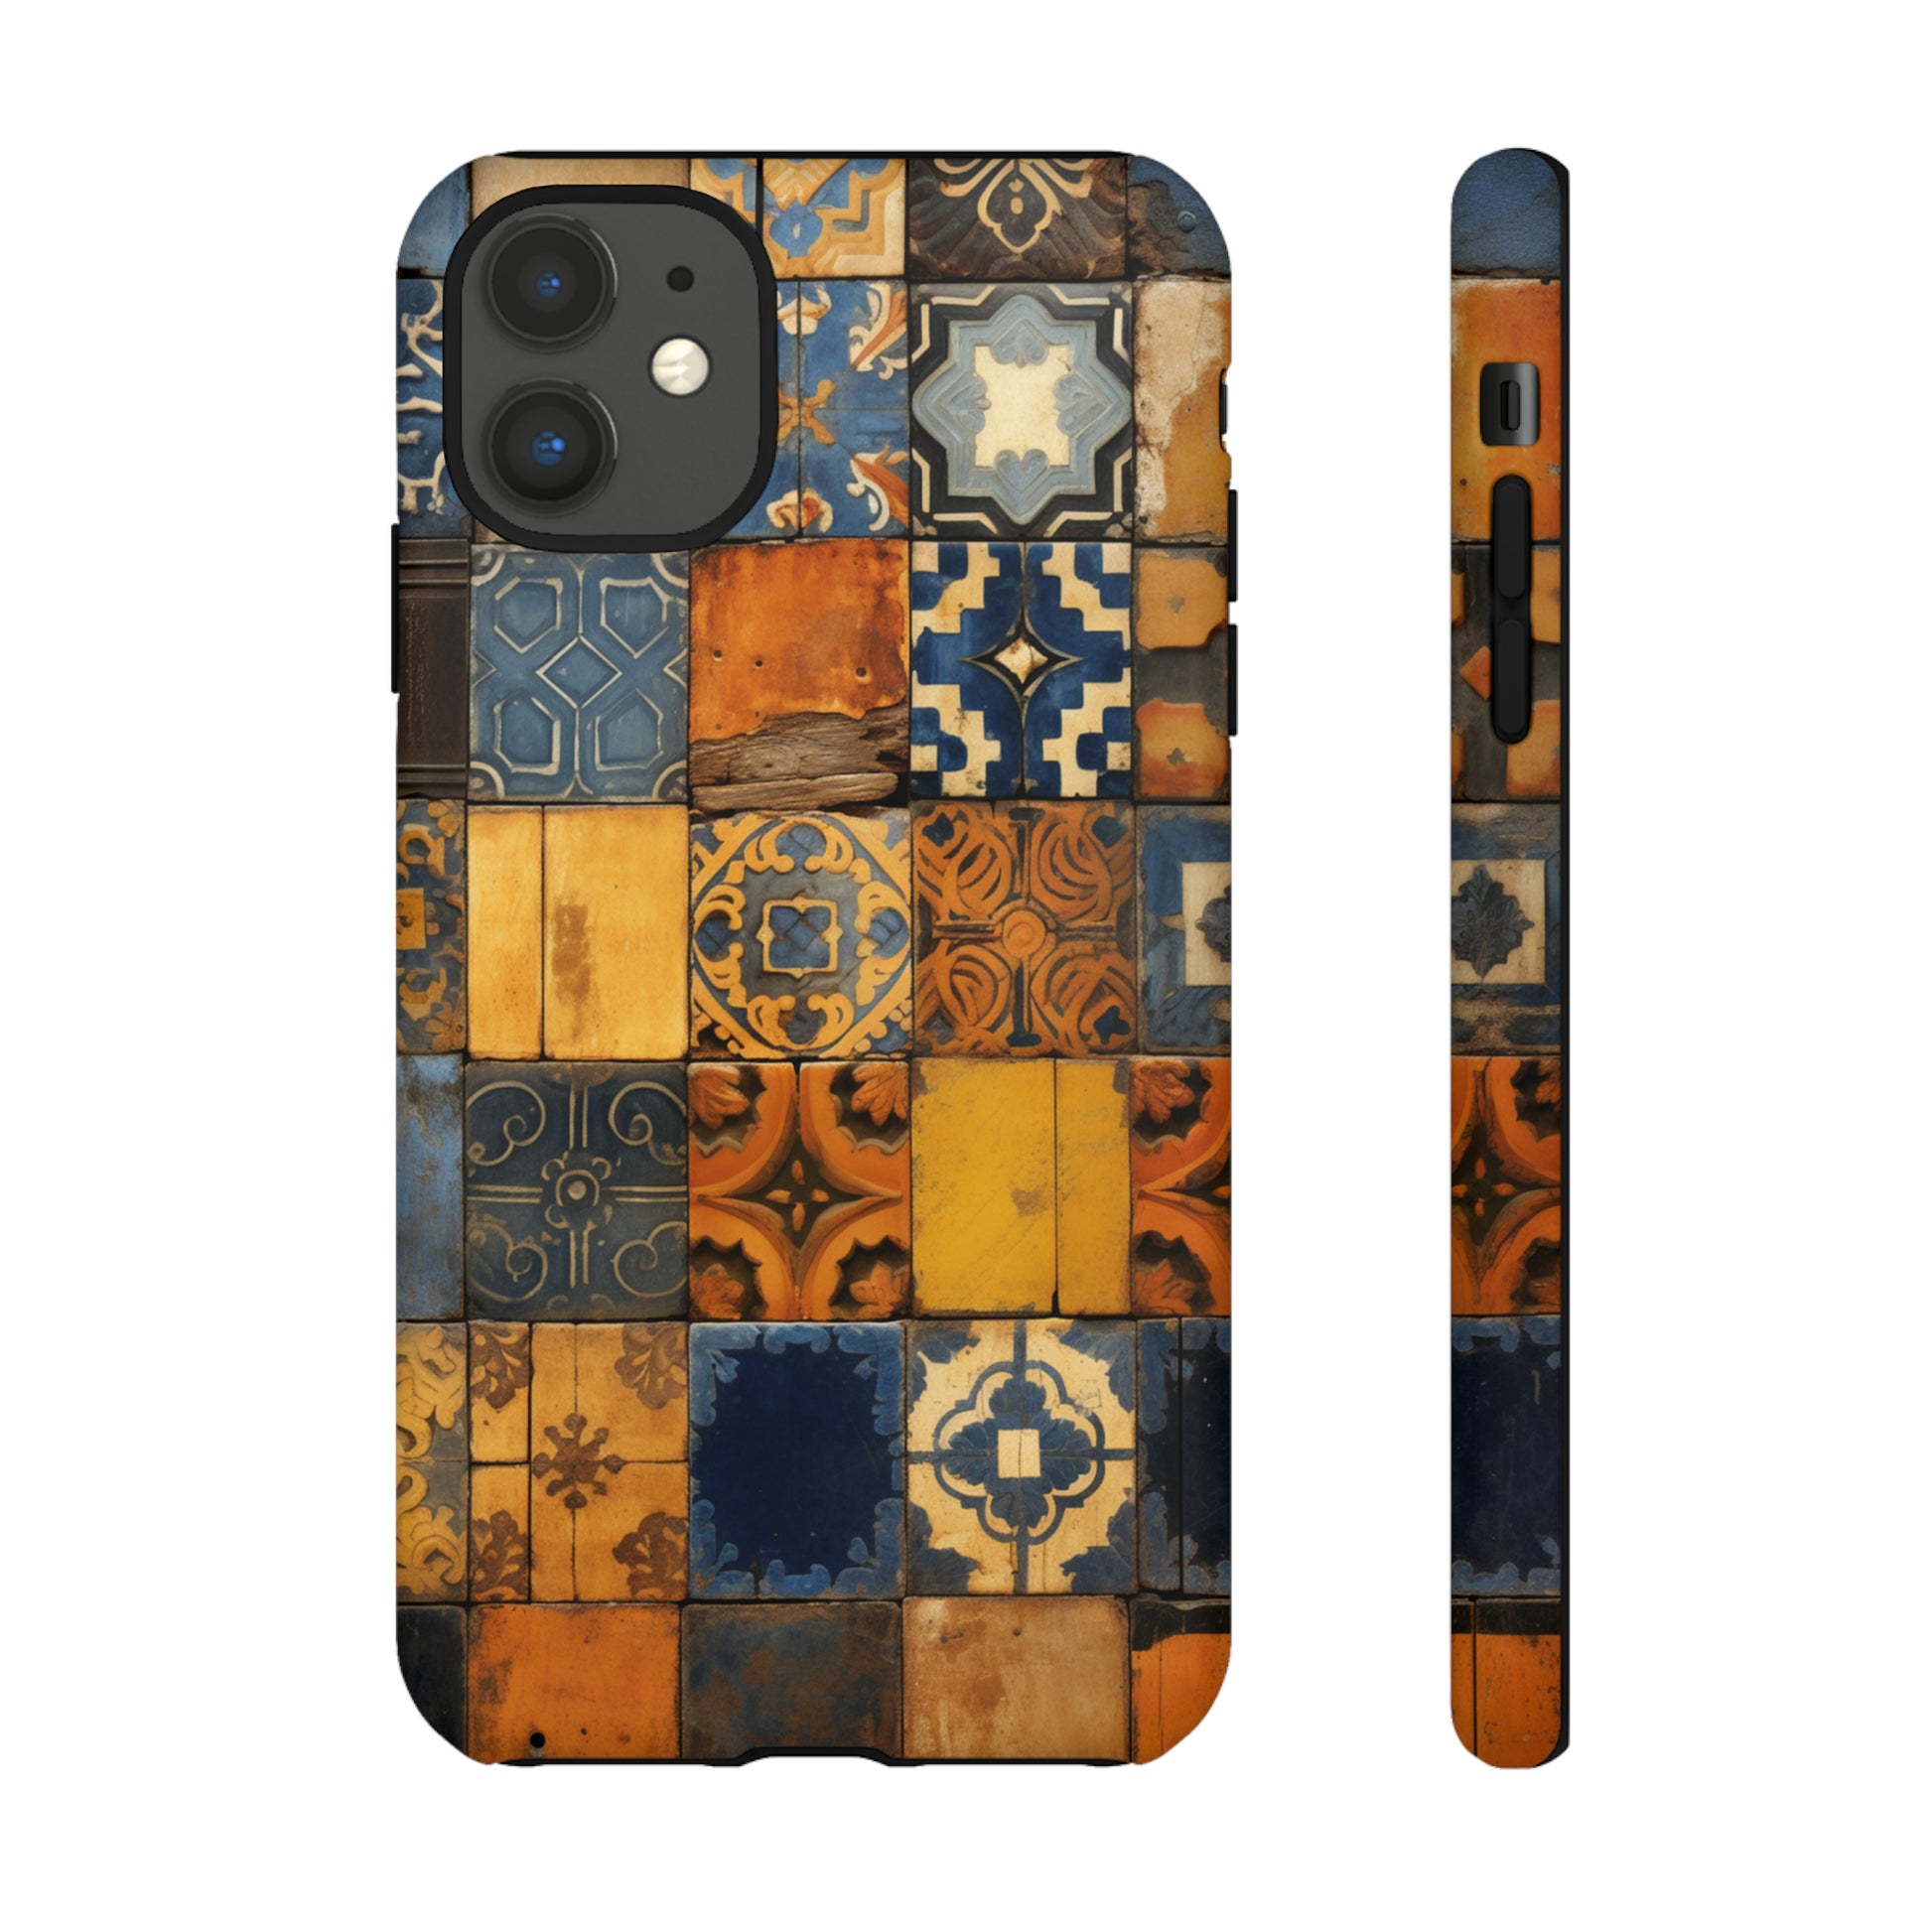 Tile art cover with Moroccan culture flair for iPhone 12